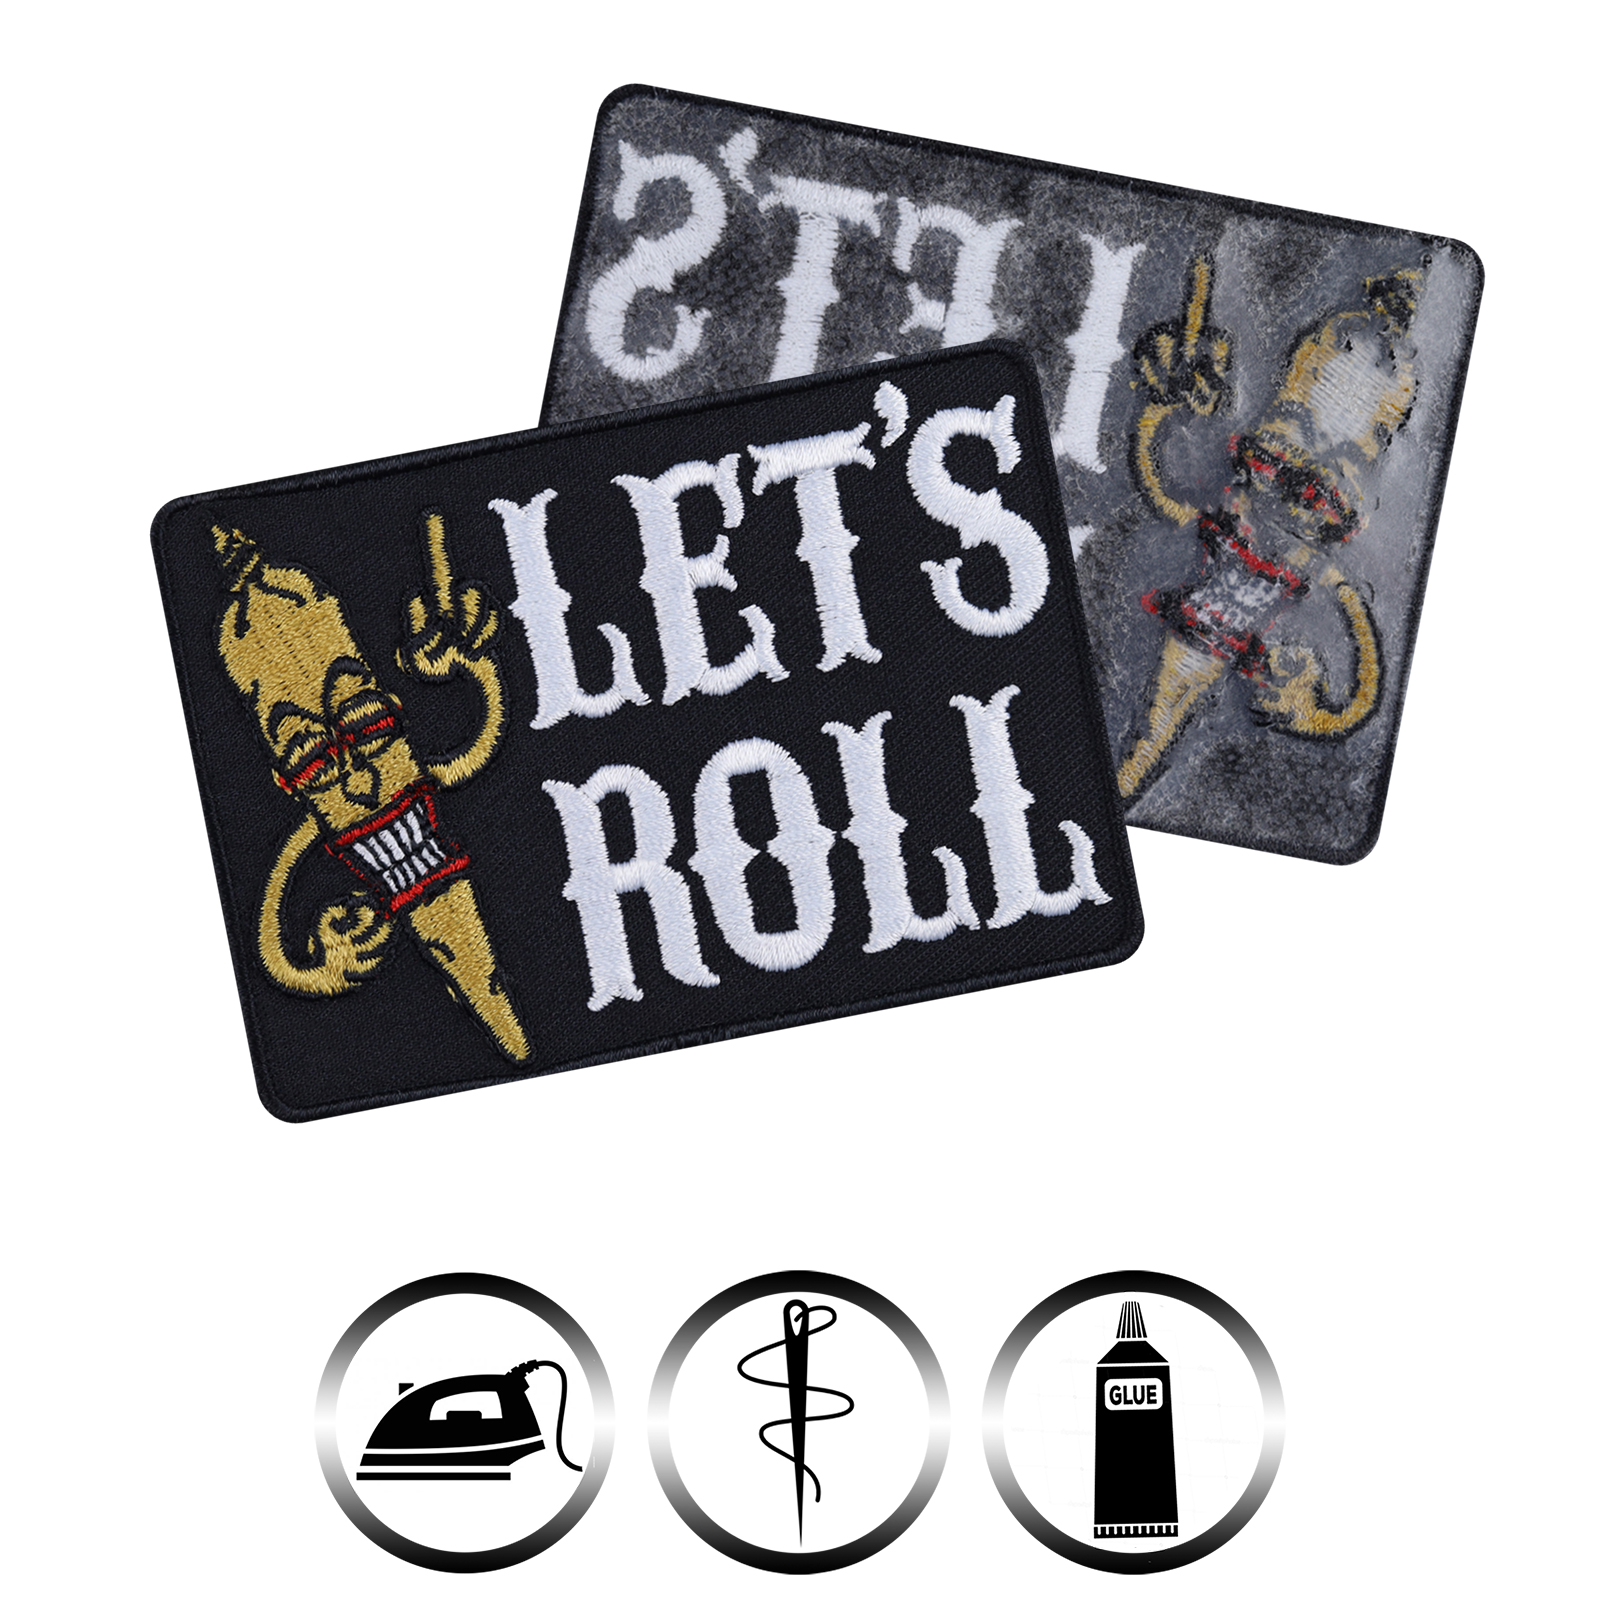 Let's roll - Patch